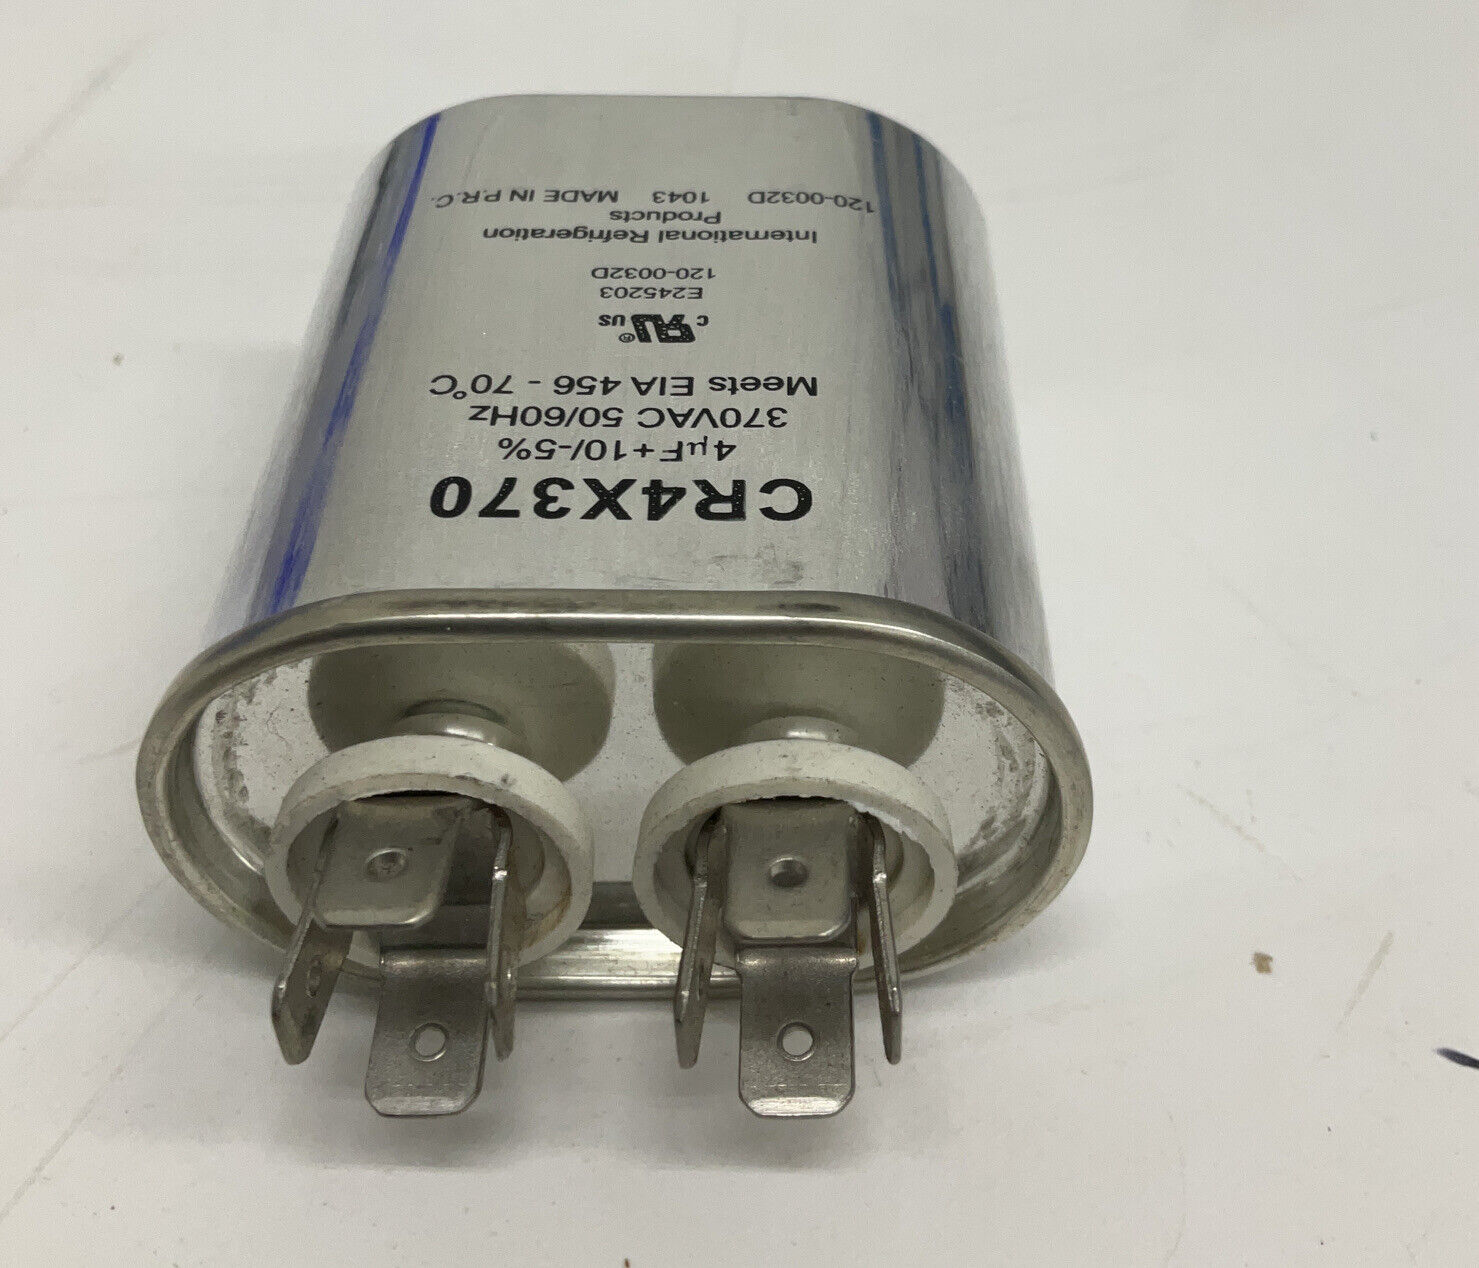 IRP CR4X370 Oval Capacitor 370 VAC (BL154)